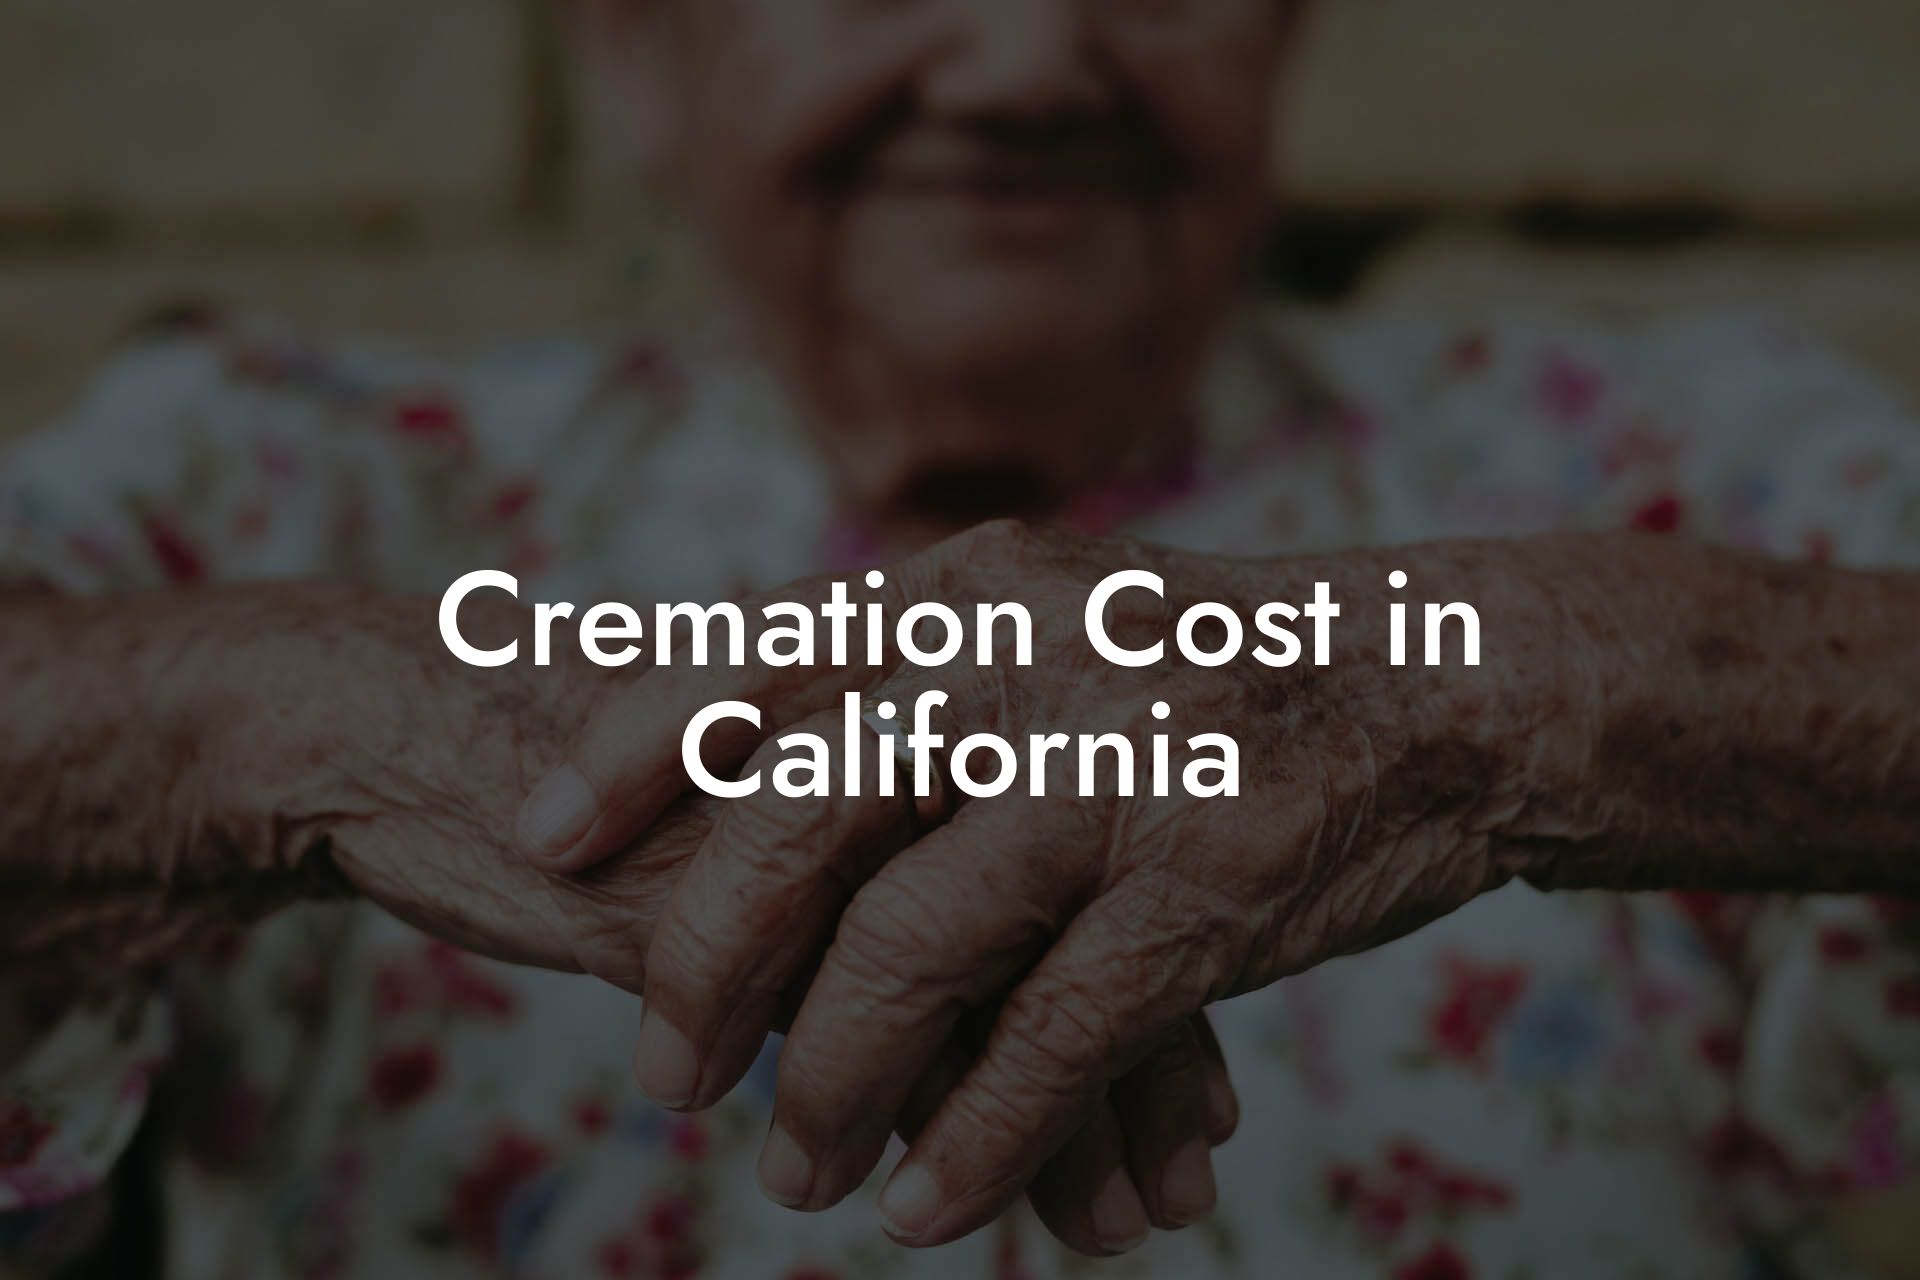 Cremation Cost in California